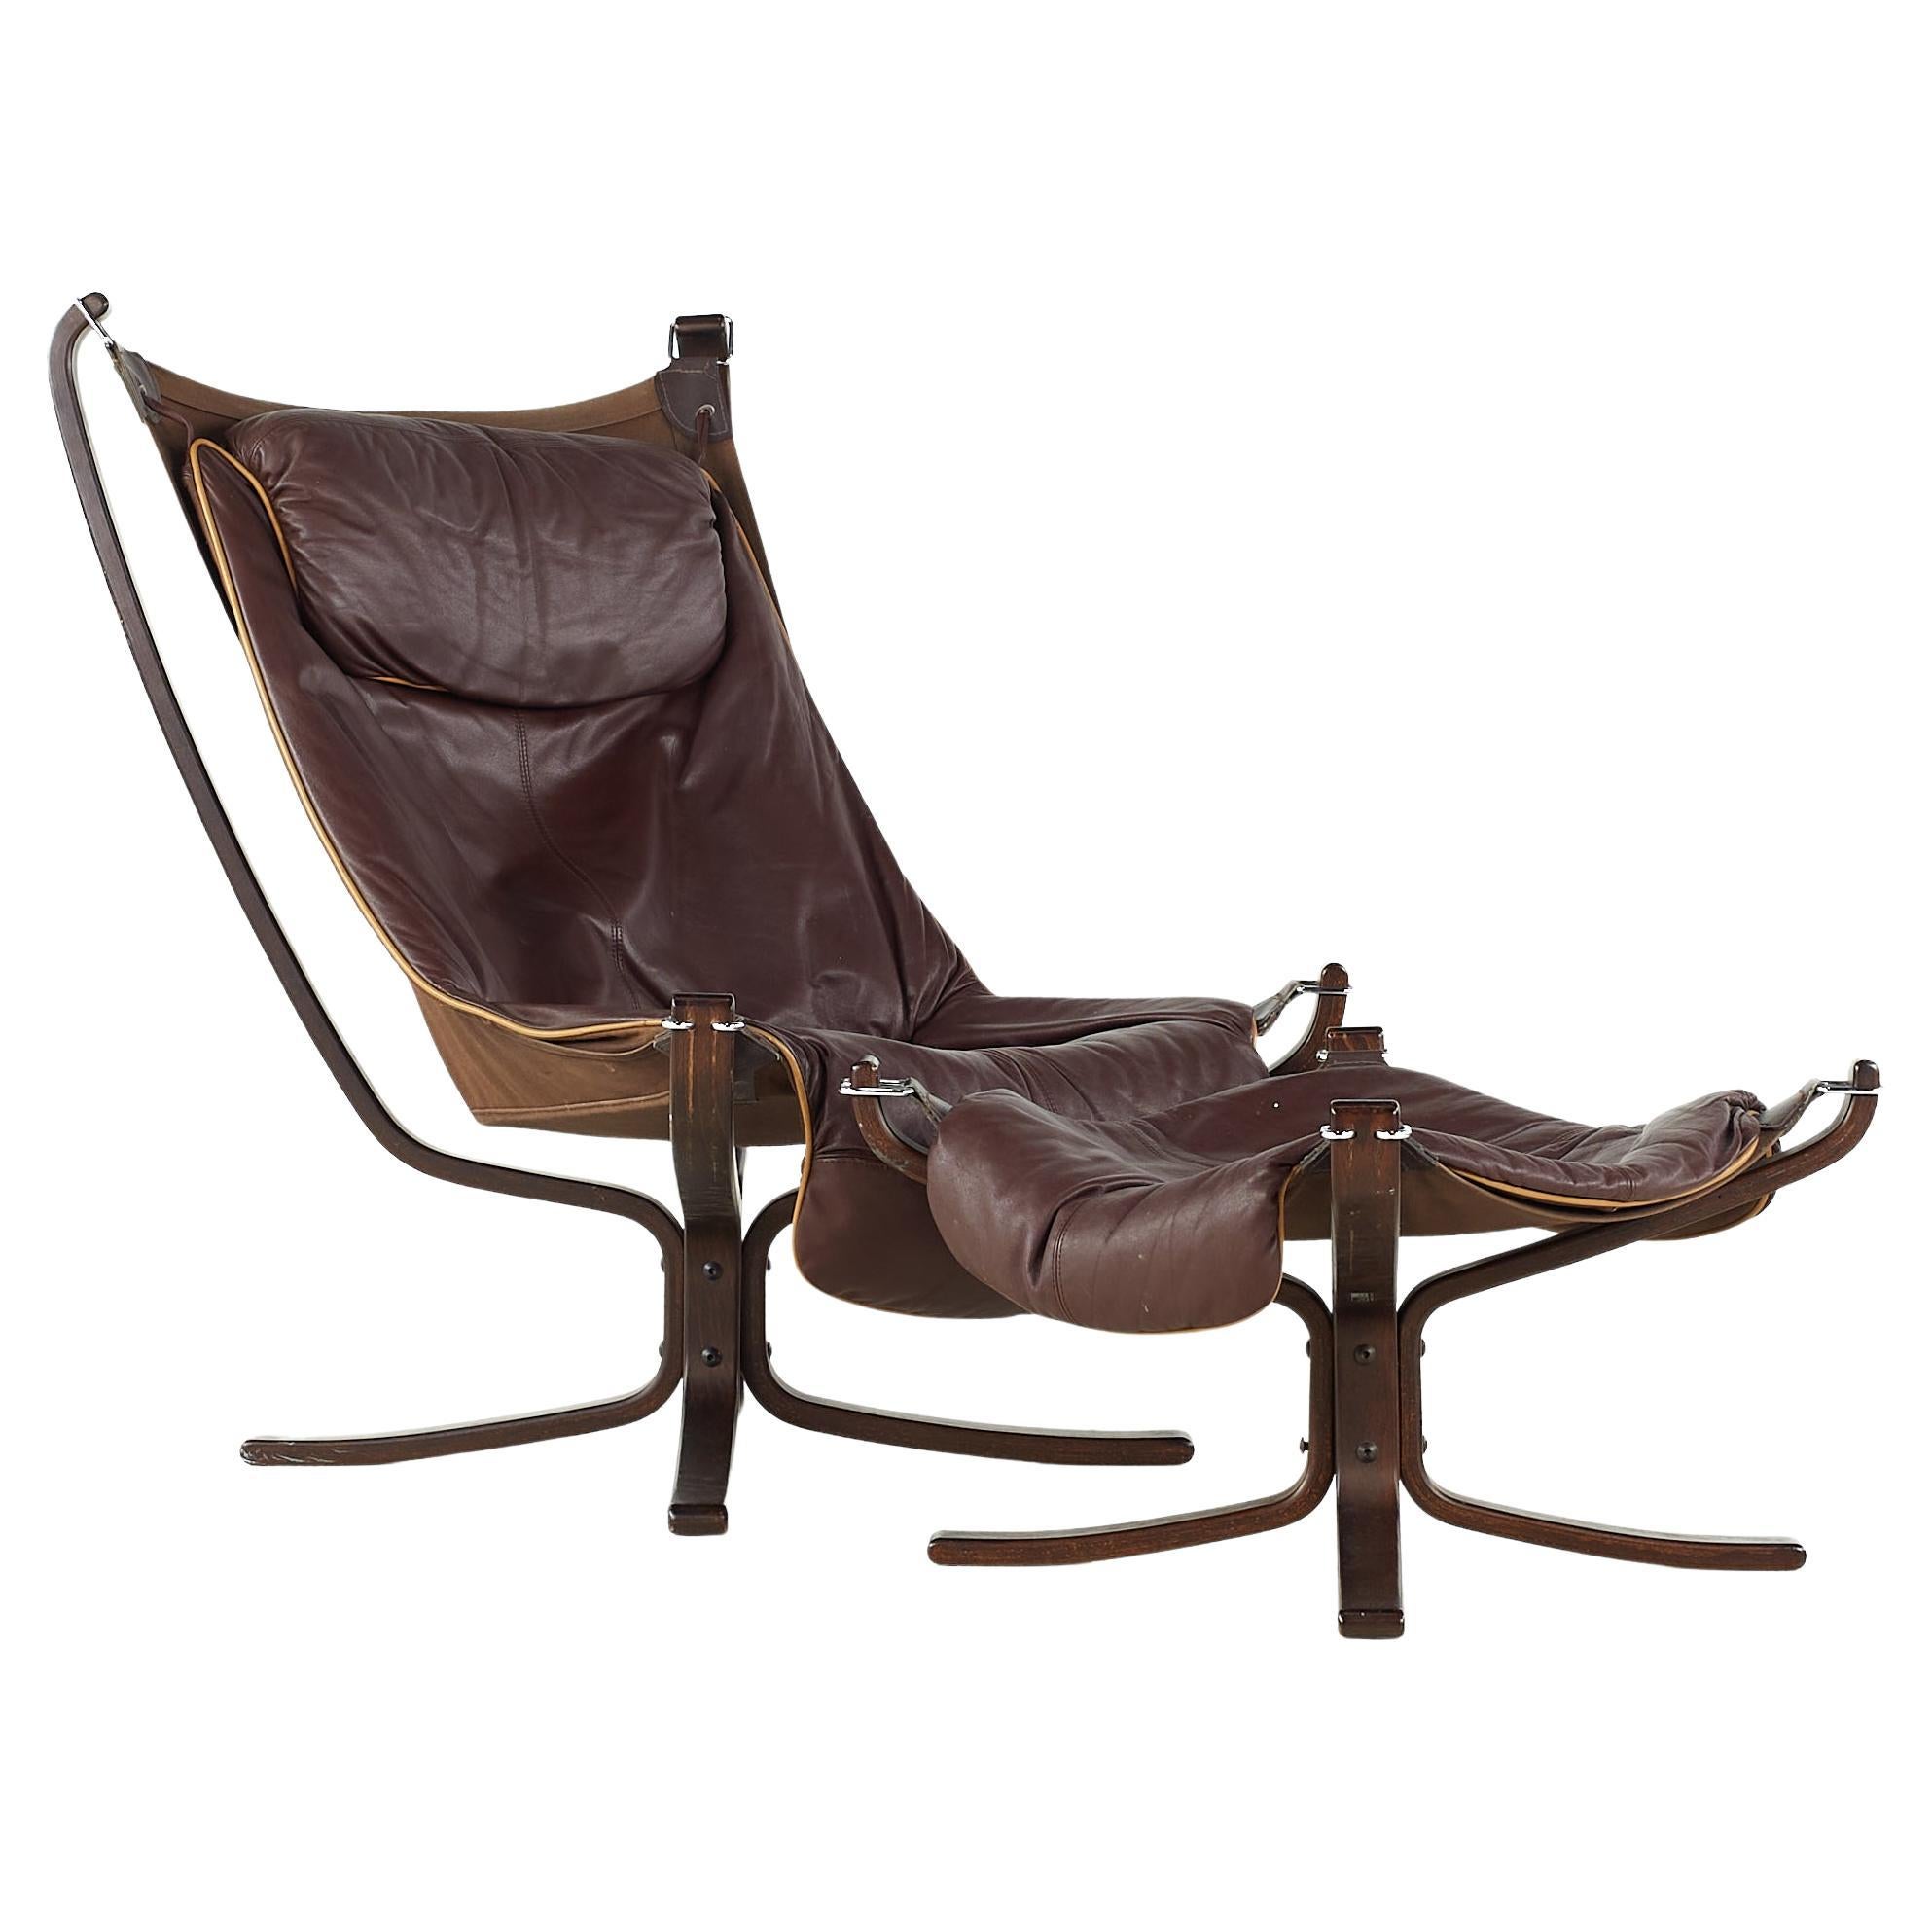 Vatne Mobler Falcon Chair - 22 For Sale on 1stDibs | falcon stol vatne,  falcon chair ottoman, vatne falcon